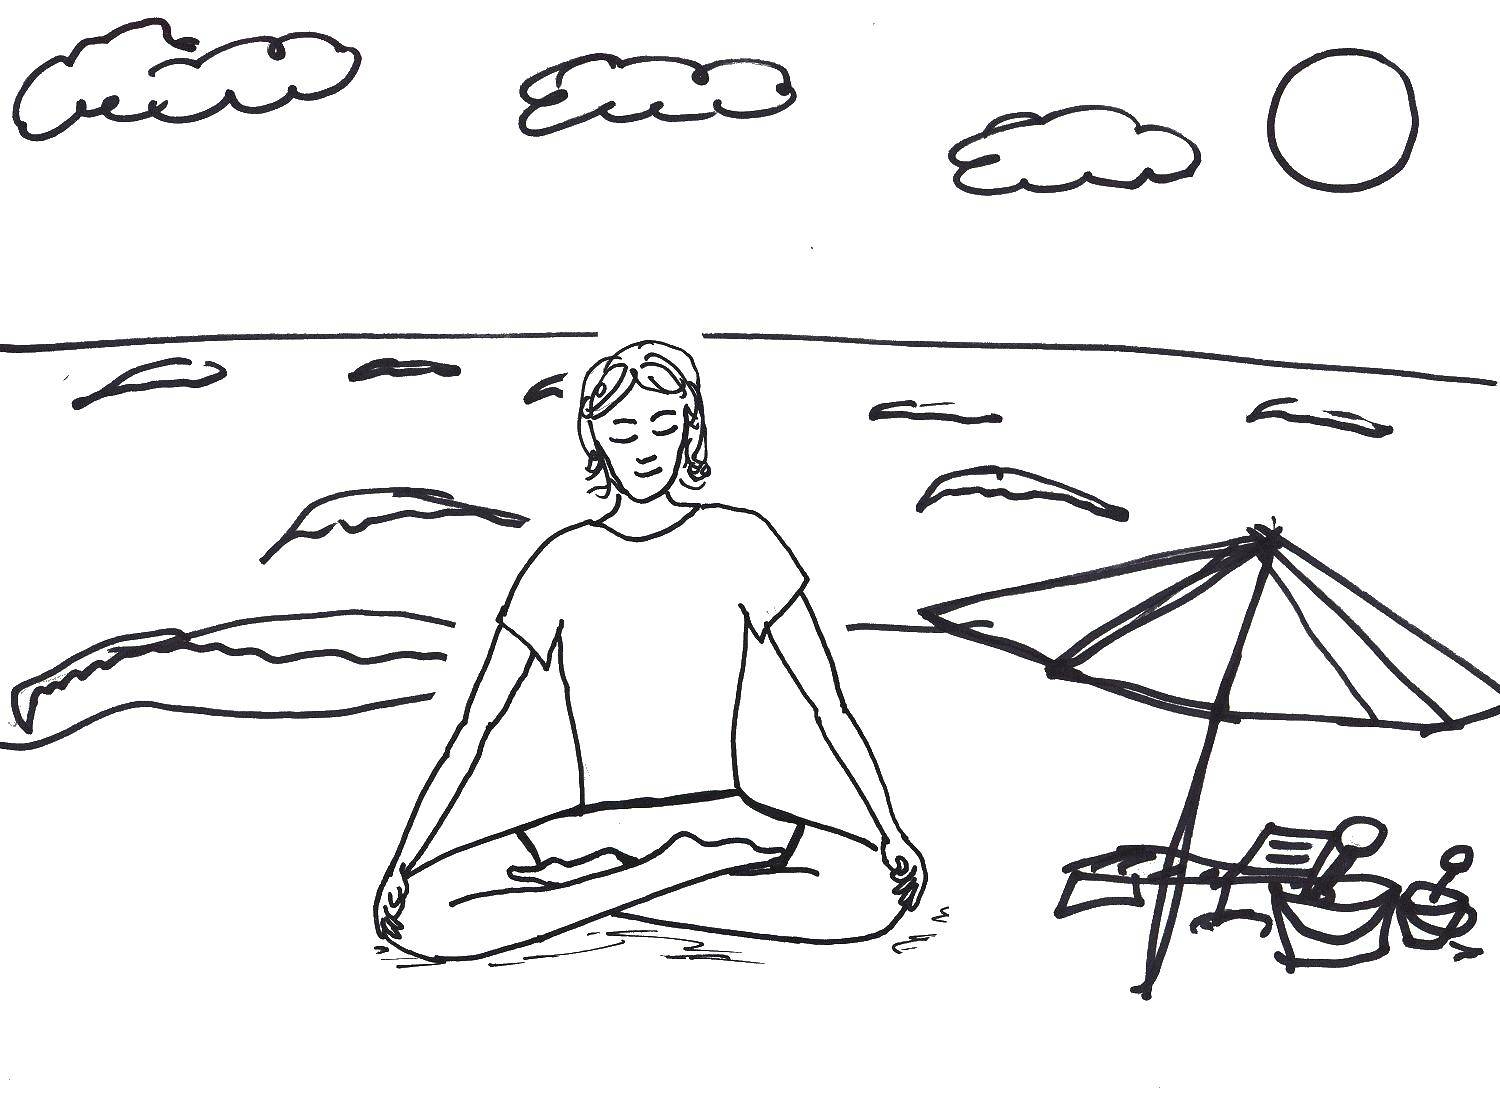 Coloring Meditation on the beach. Category yoga. Tags:  meditation.